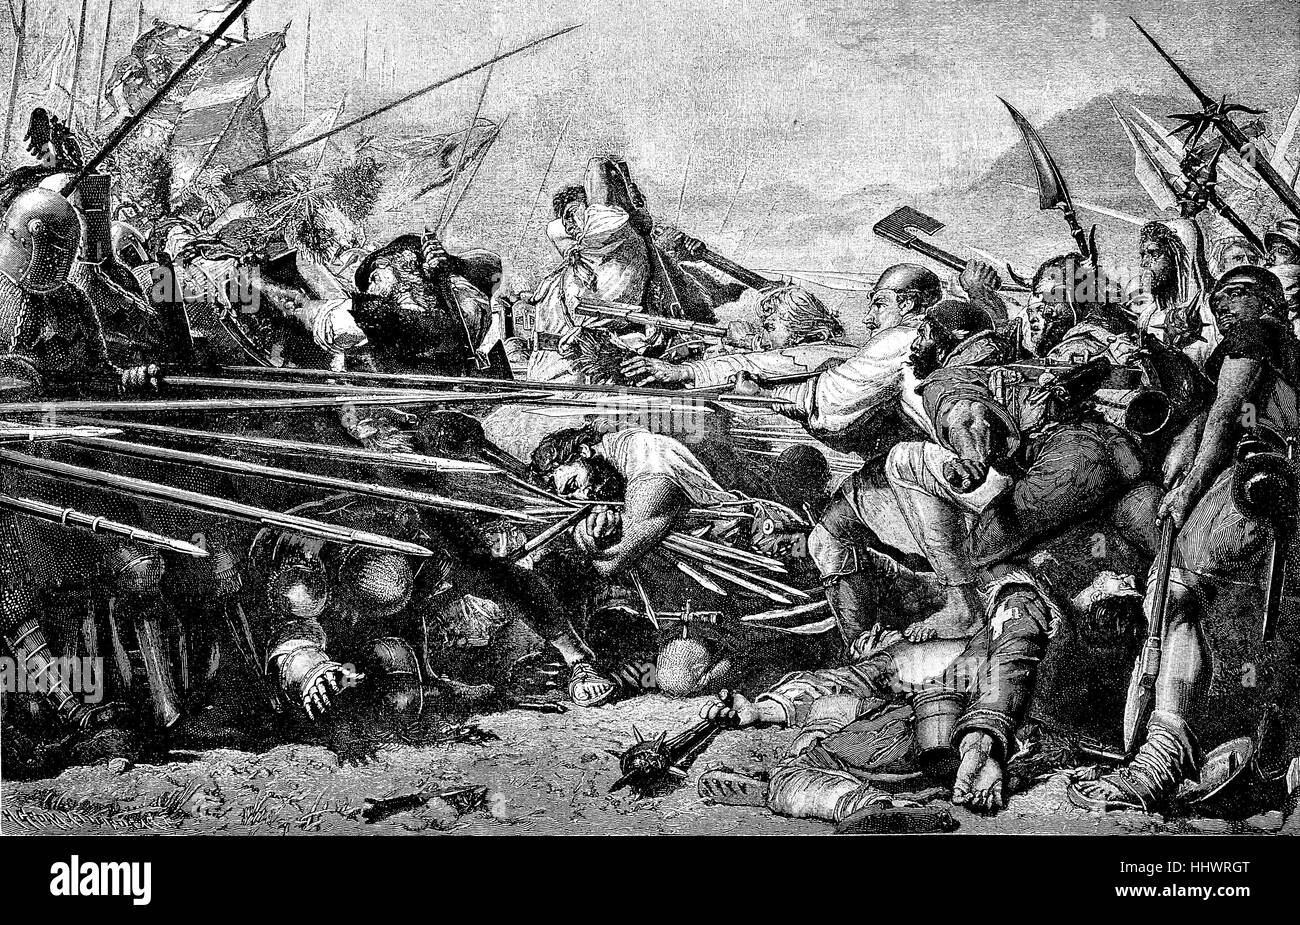 Battle of Sempach, conflict between the Habsburgs and the Swiss during the Swiss Habsburg War, Canton Lucerne, Switzerland, historical image or illustration, published 1890, digital improved Stock Photo